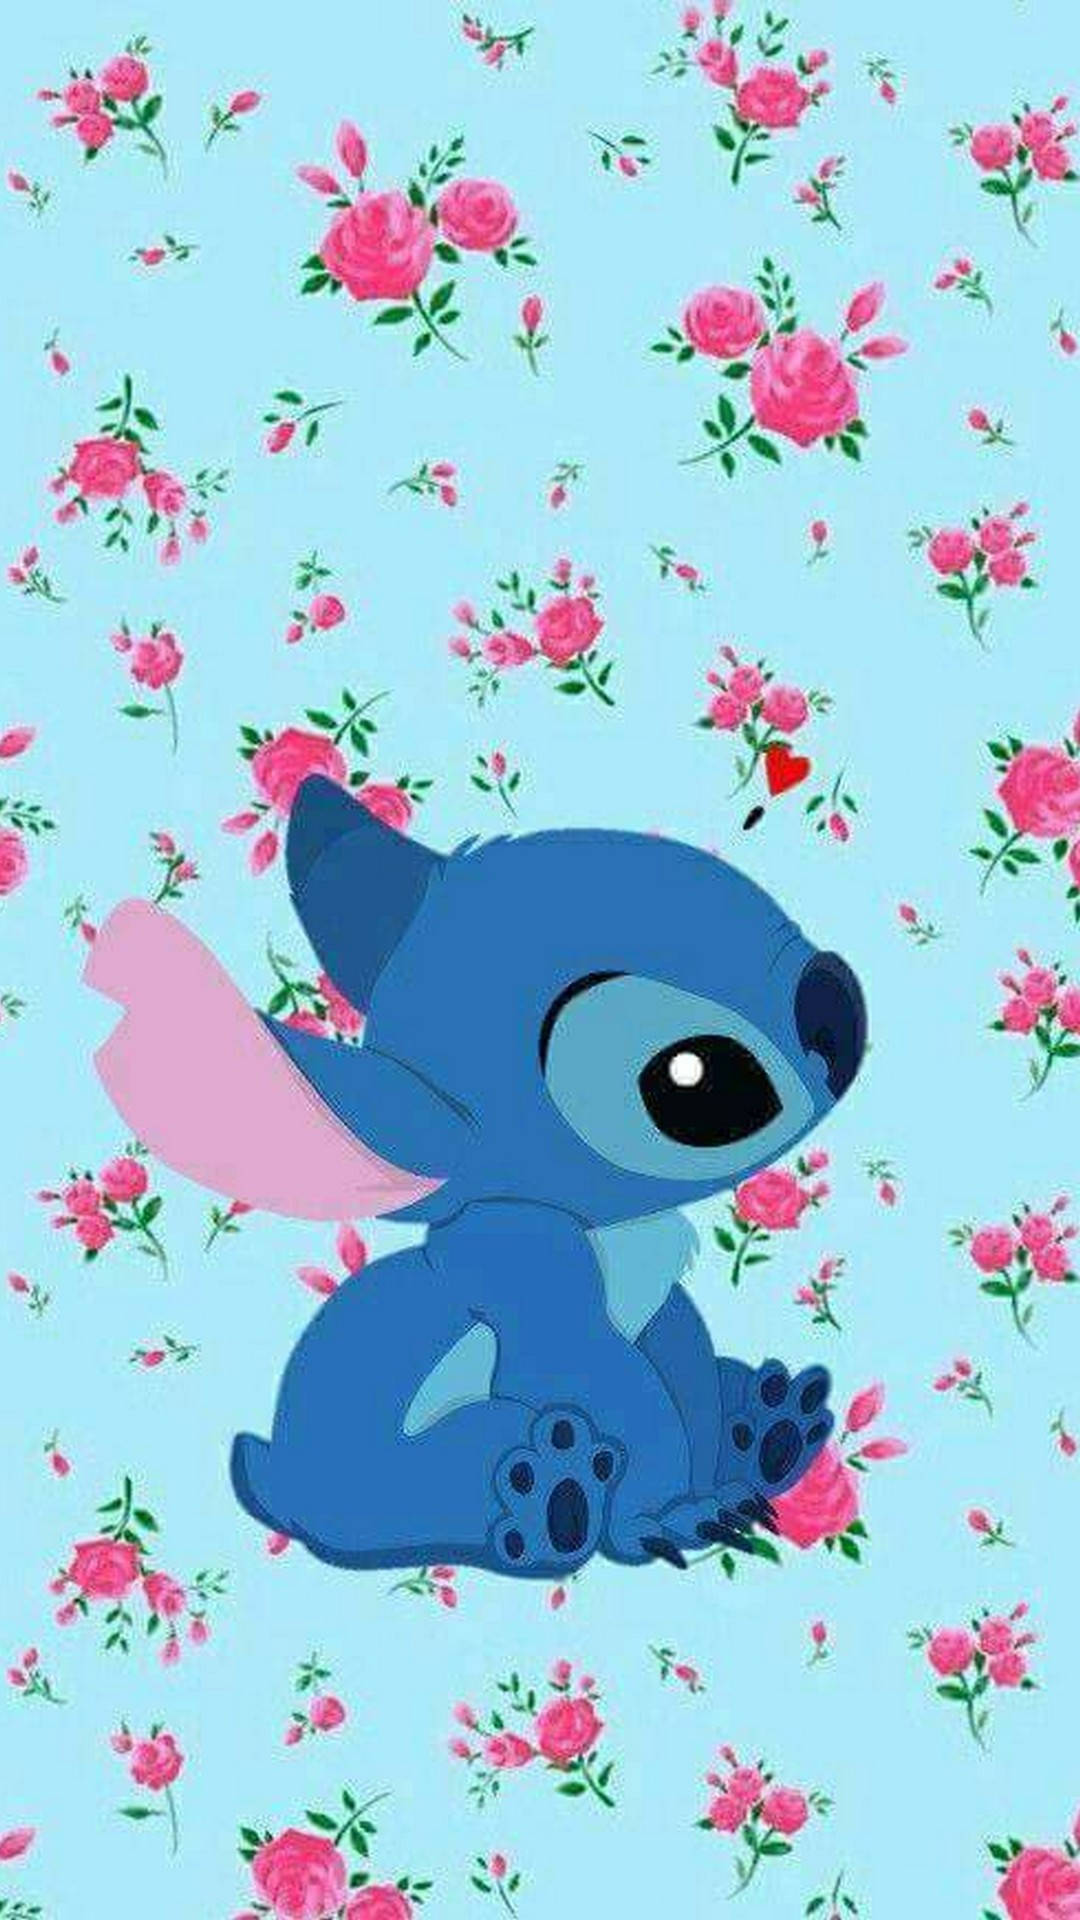 Cute Stitch And Pink Roses Background